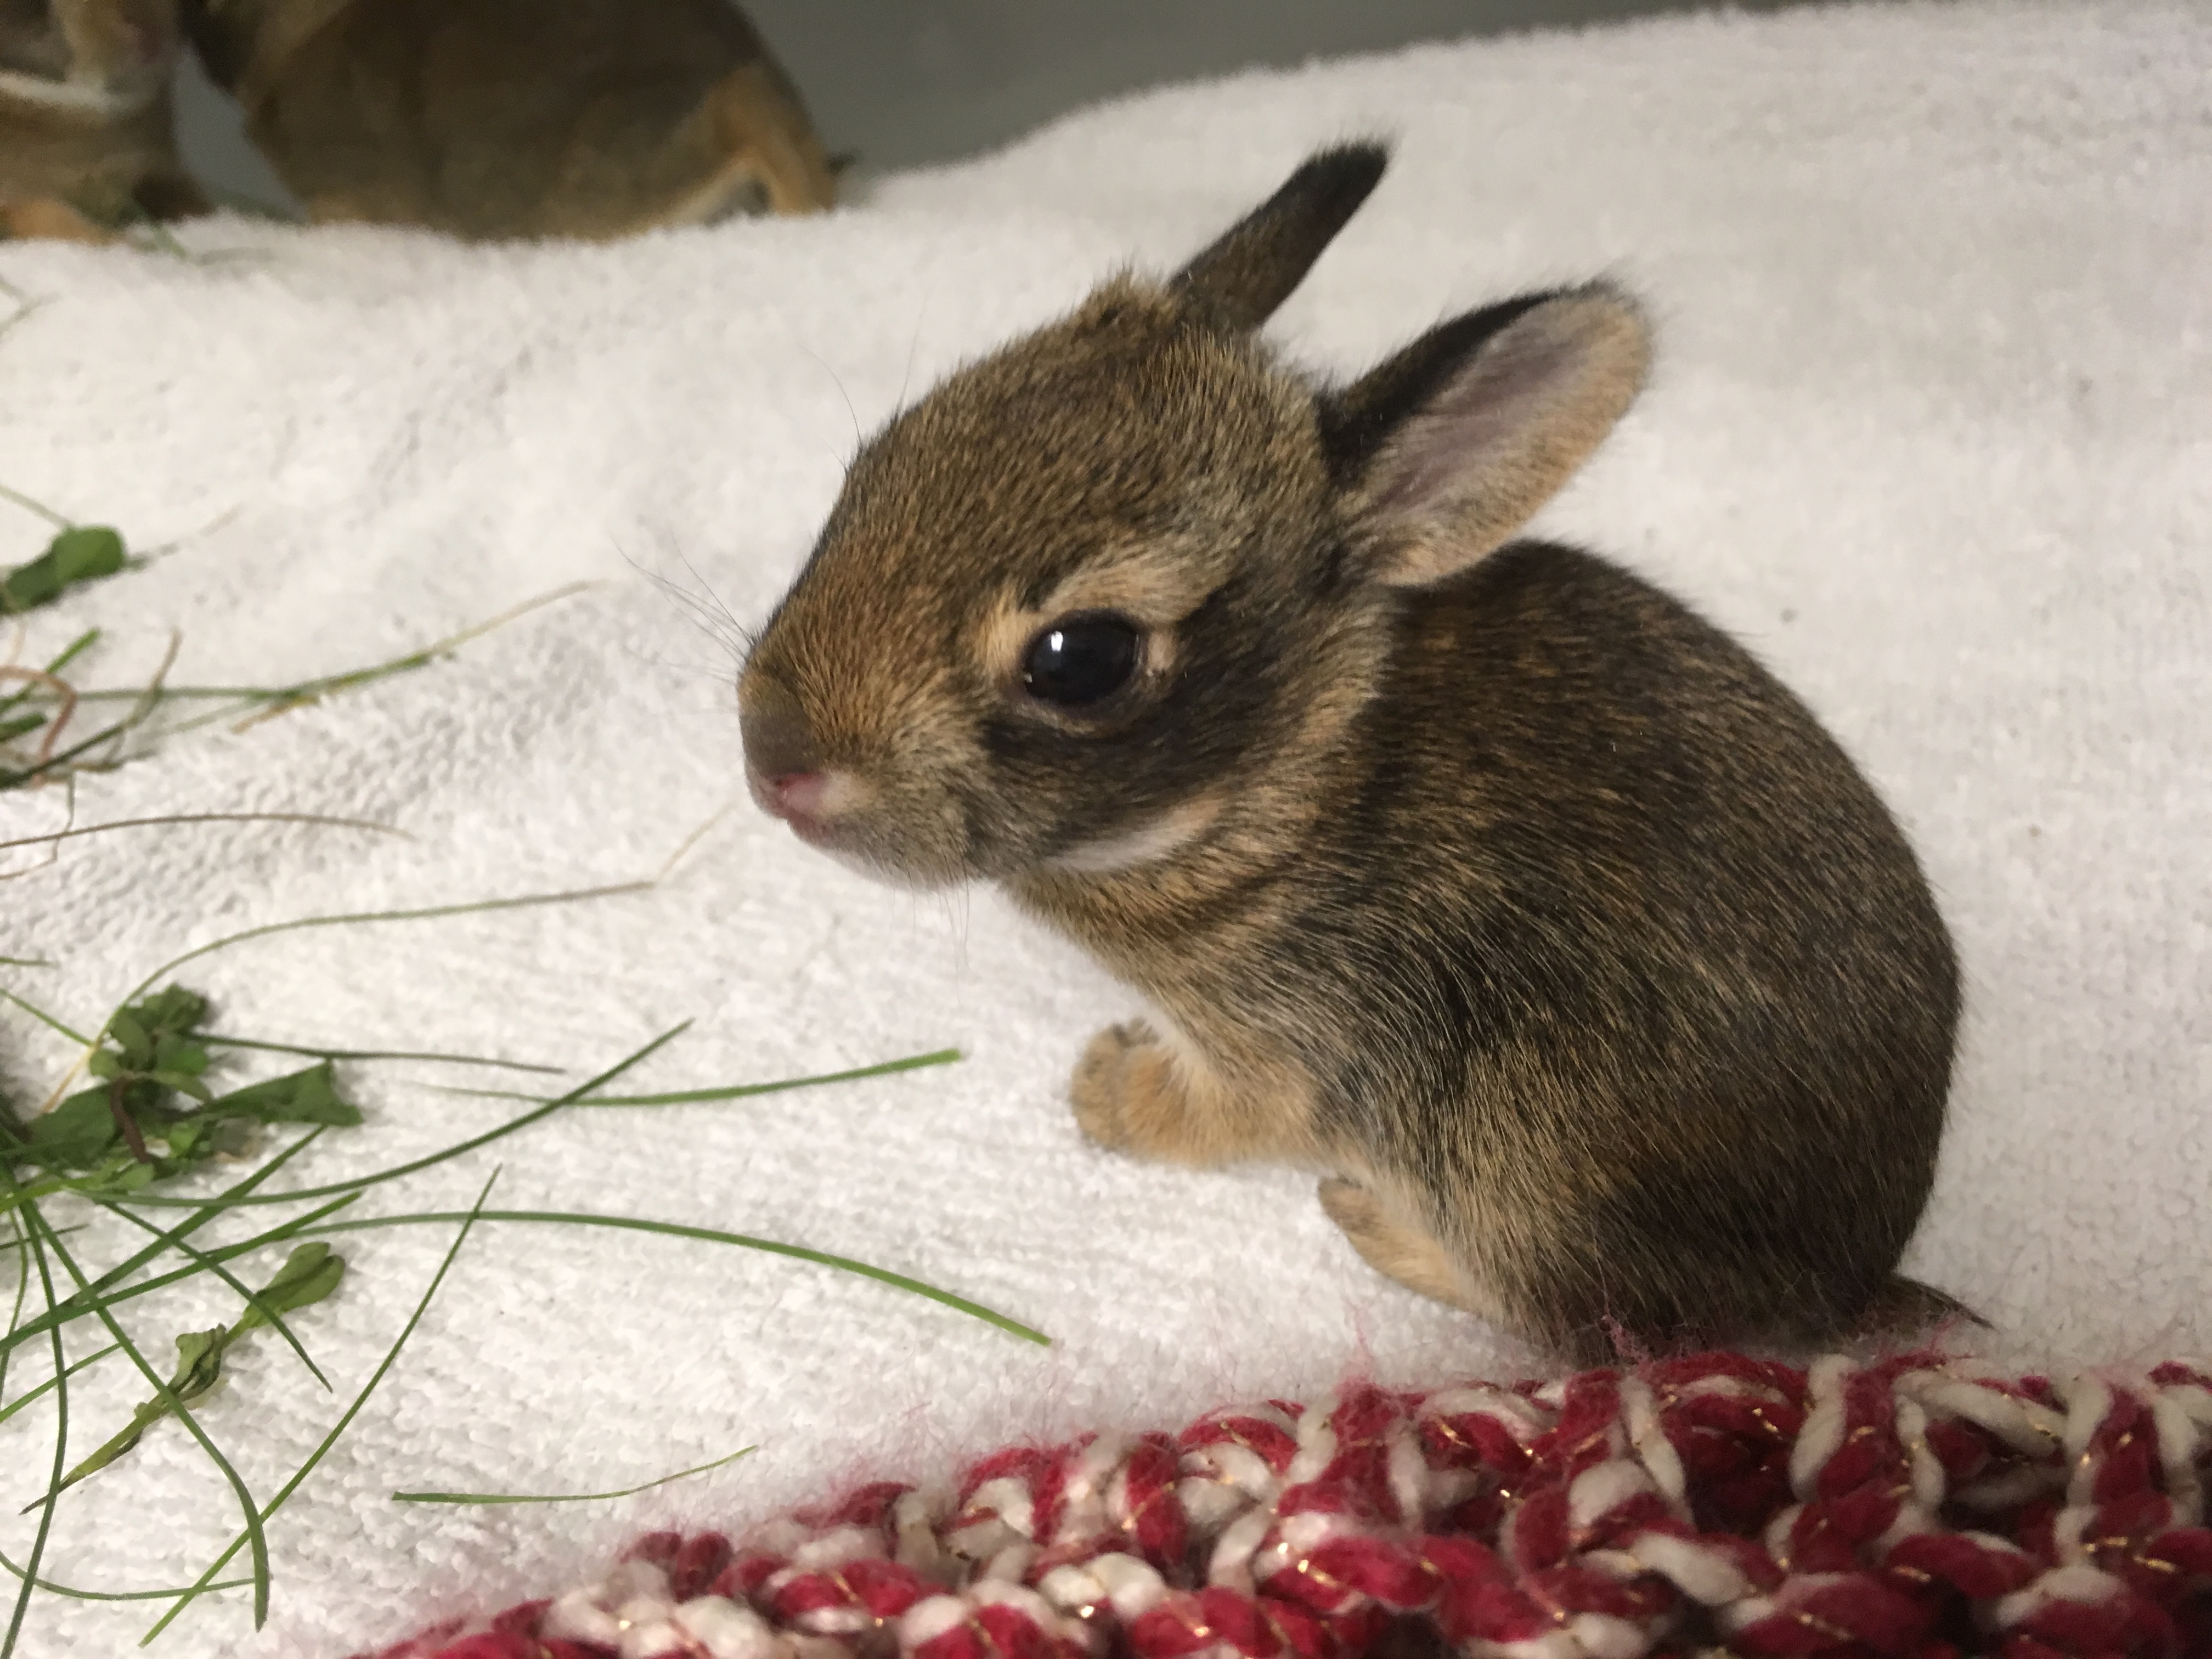 Baby bunnies, one of the most common animals seen in wildlife rehabilitation. A check-up at Janet L. Swanson Wildlife Health Center before going onto a licensed wildlife rehabilitator for continued care.